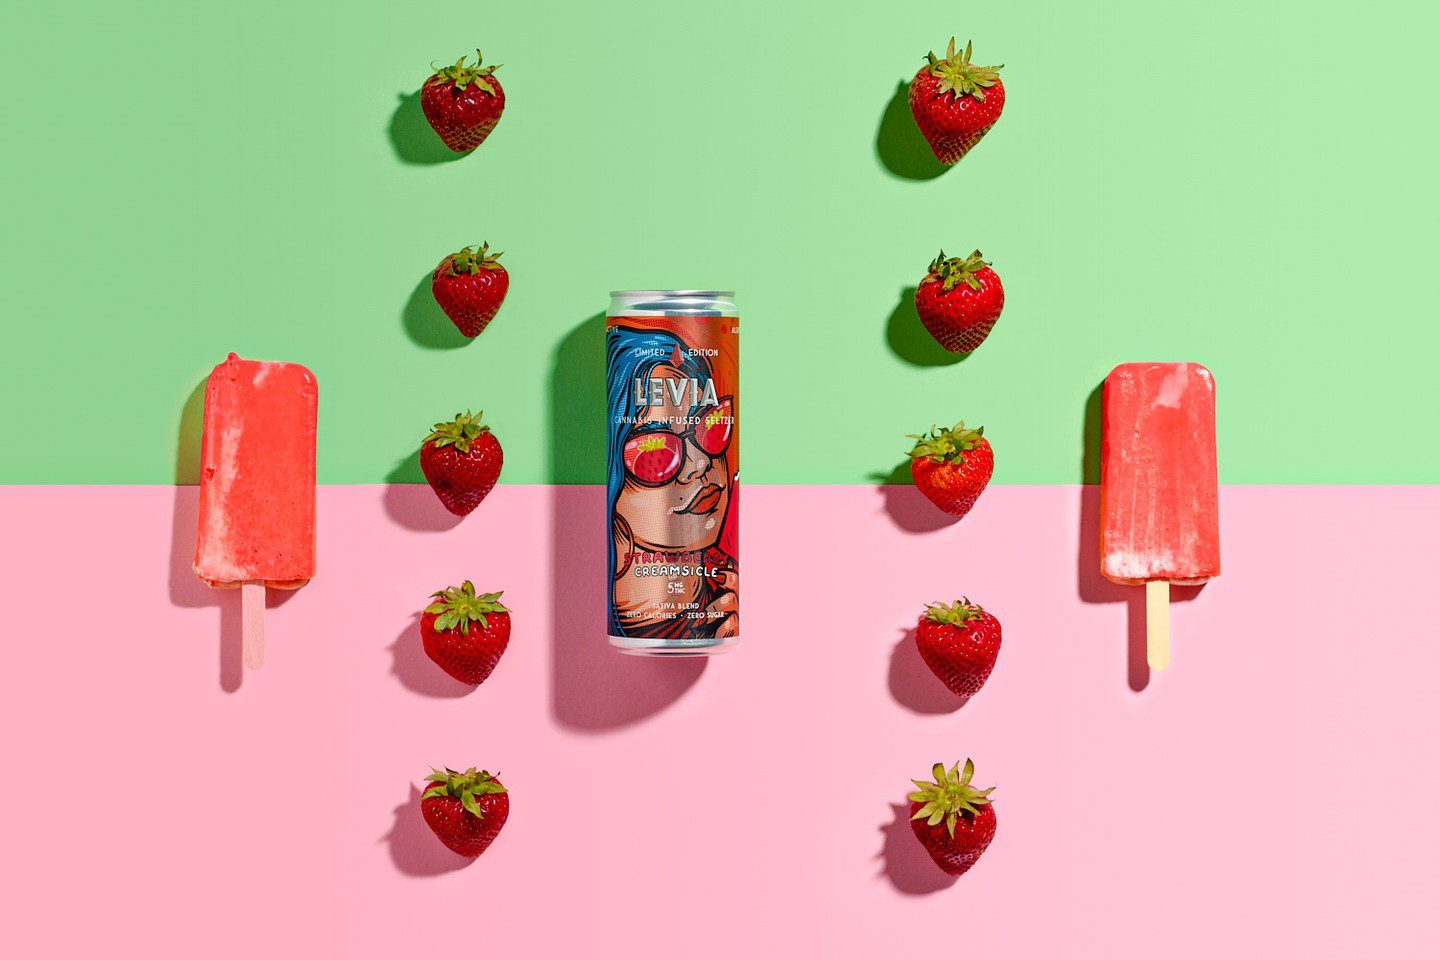 Holding on to the flavors of summer as long as possible with our newly release Fall seasonal flavor, Strawberry Creamsicle.
: @craigcapellophotography